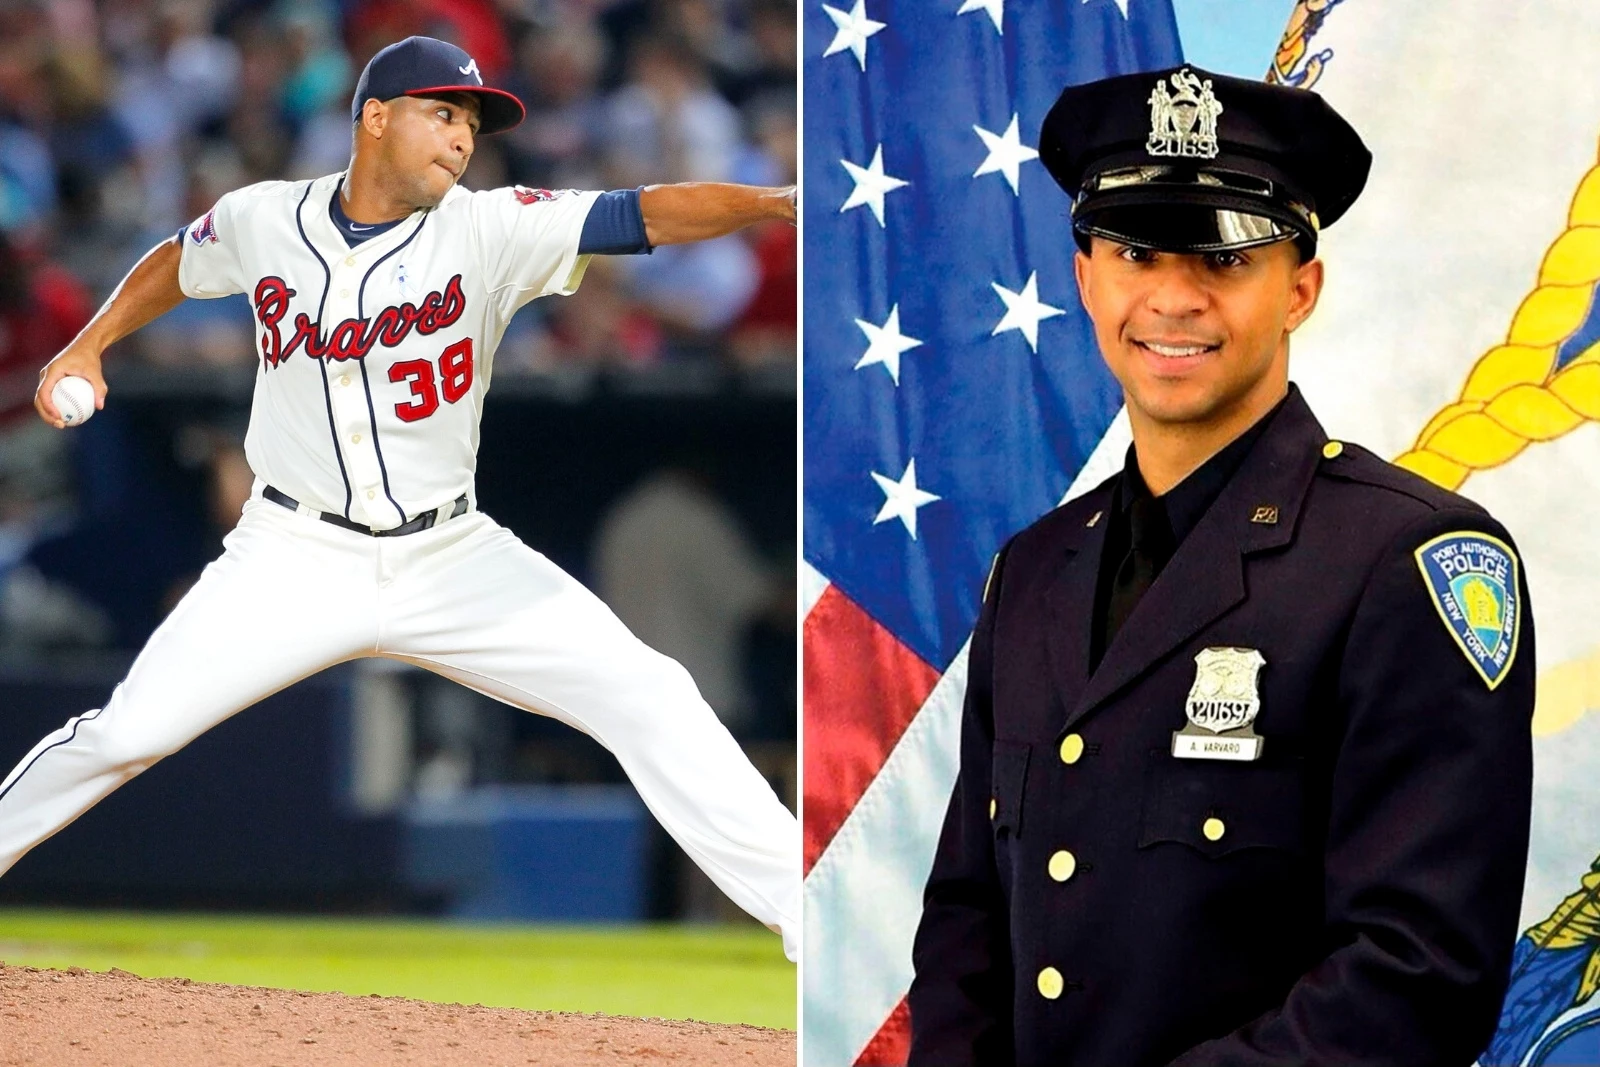 MLB pitcher turned Port Authority cop dies in car crash headed to 9/11
memorial